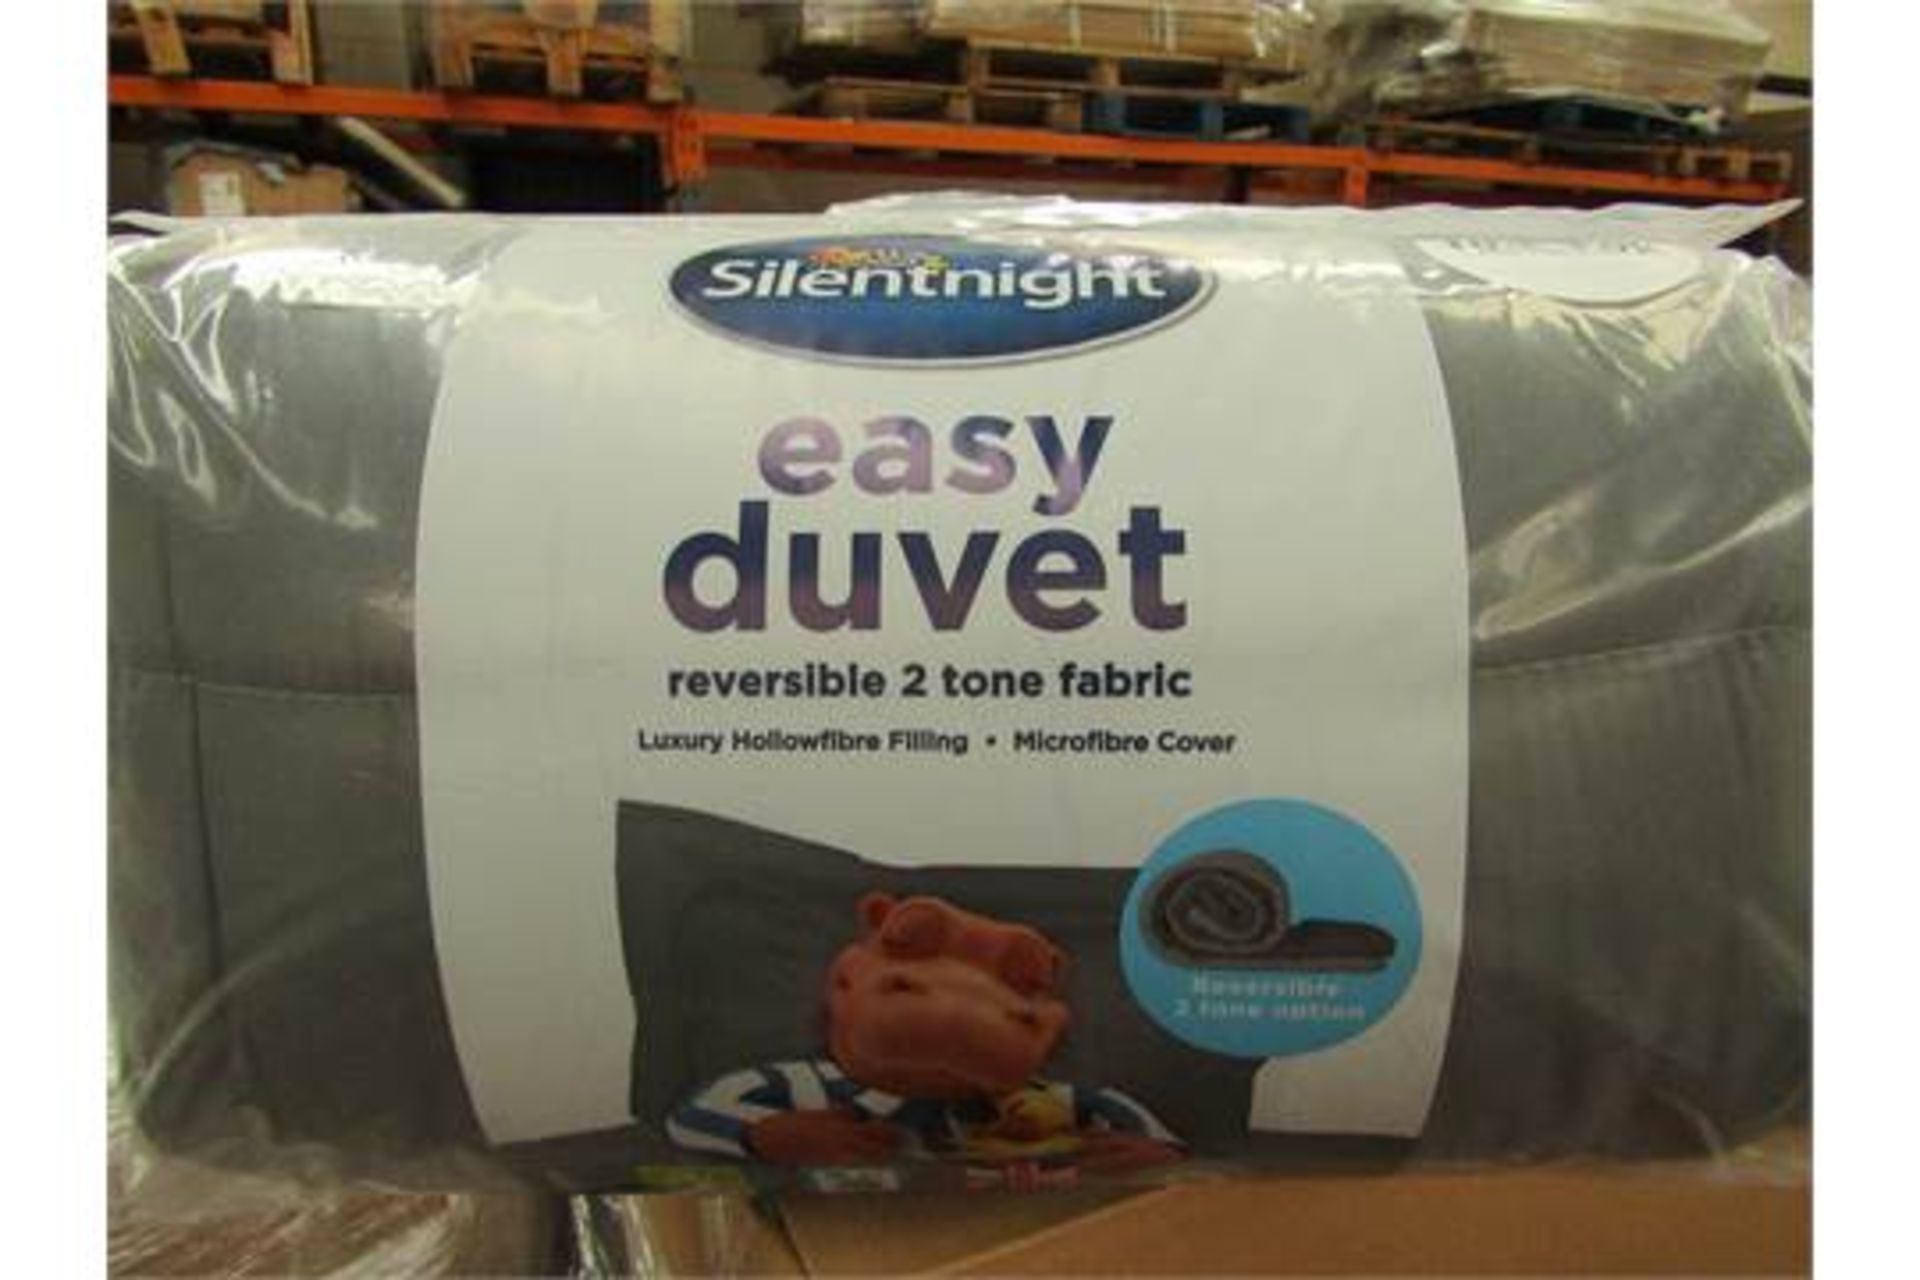 Silentnight easy duvet, reversible 2 tone fabric, 10.5Tog Double size, new in packaging.